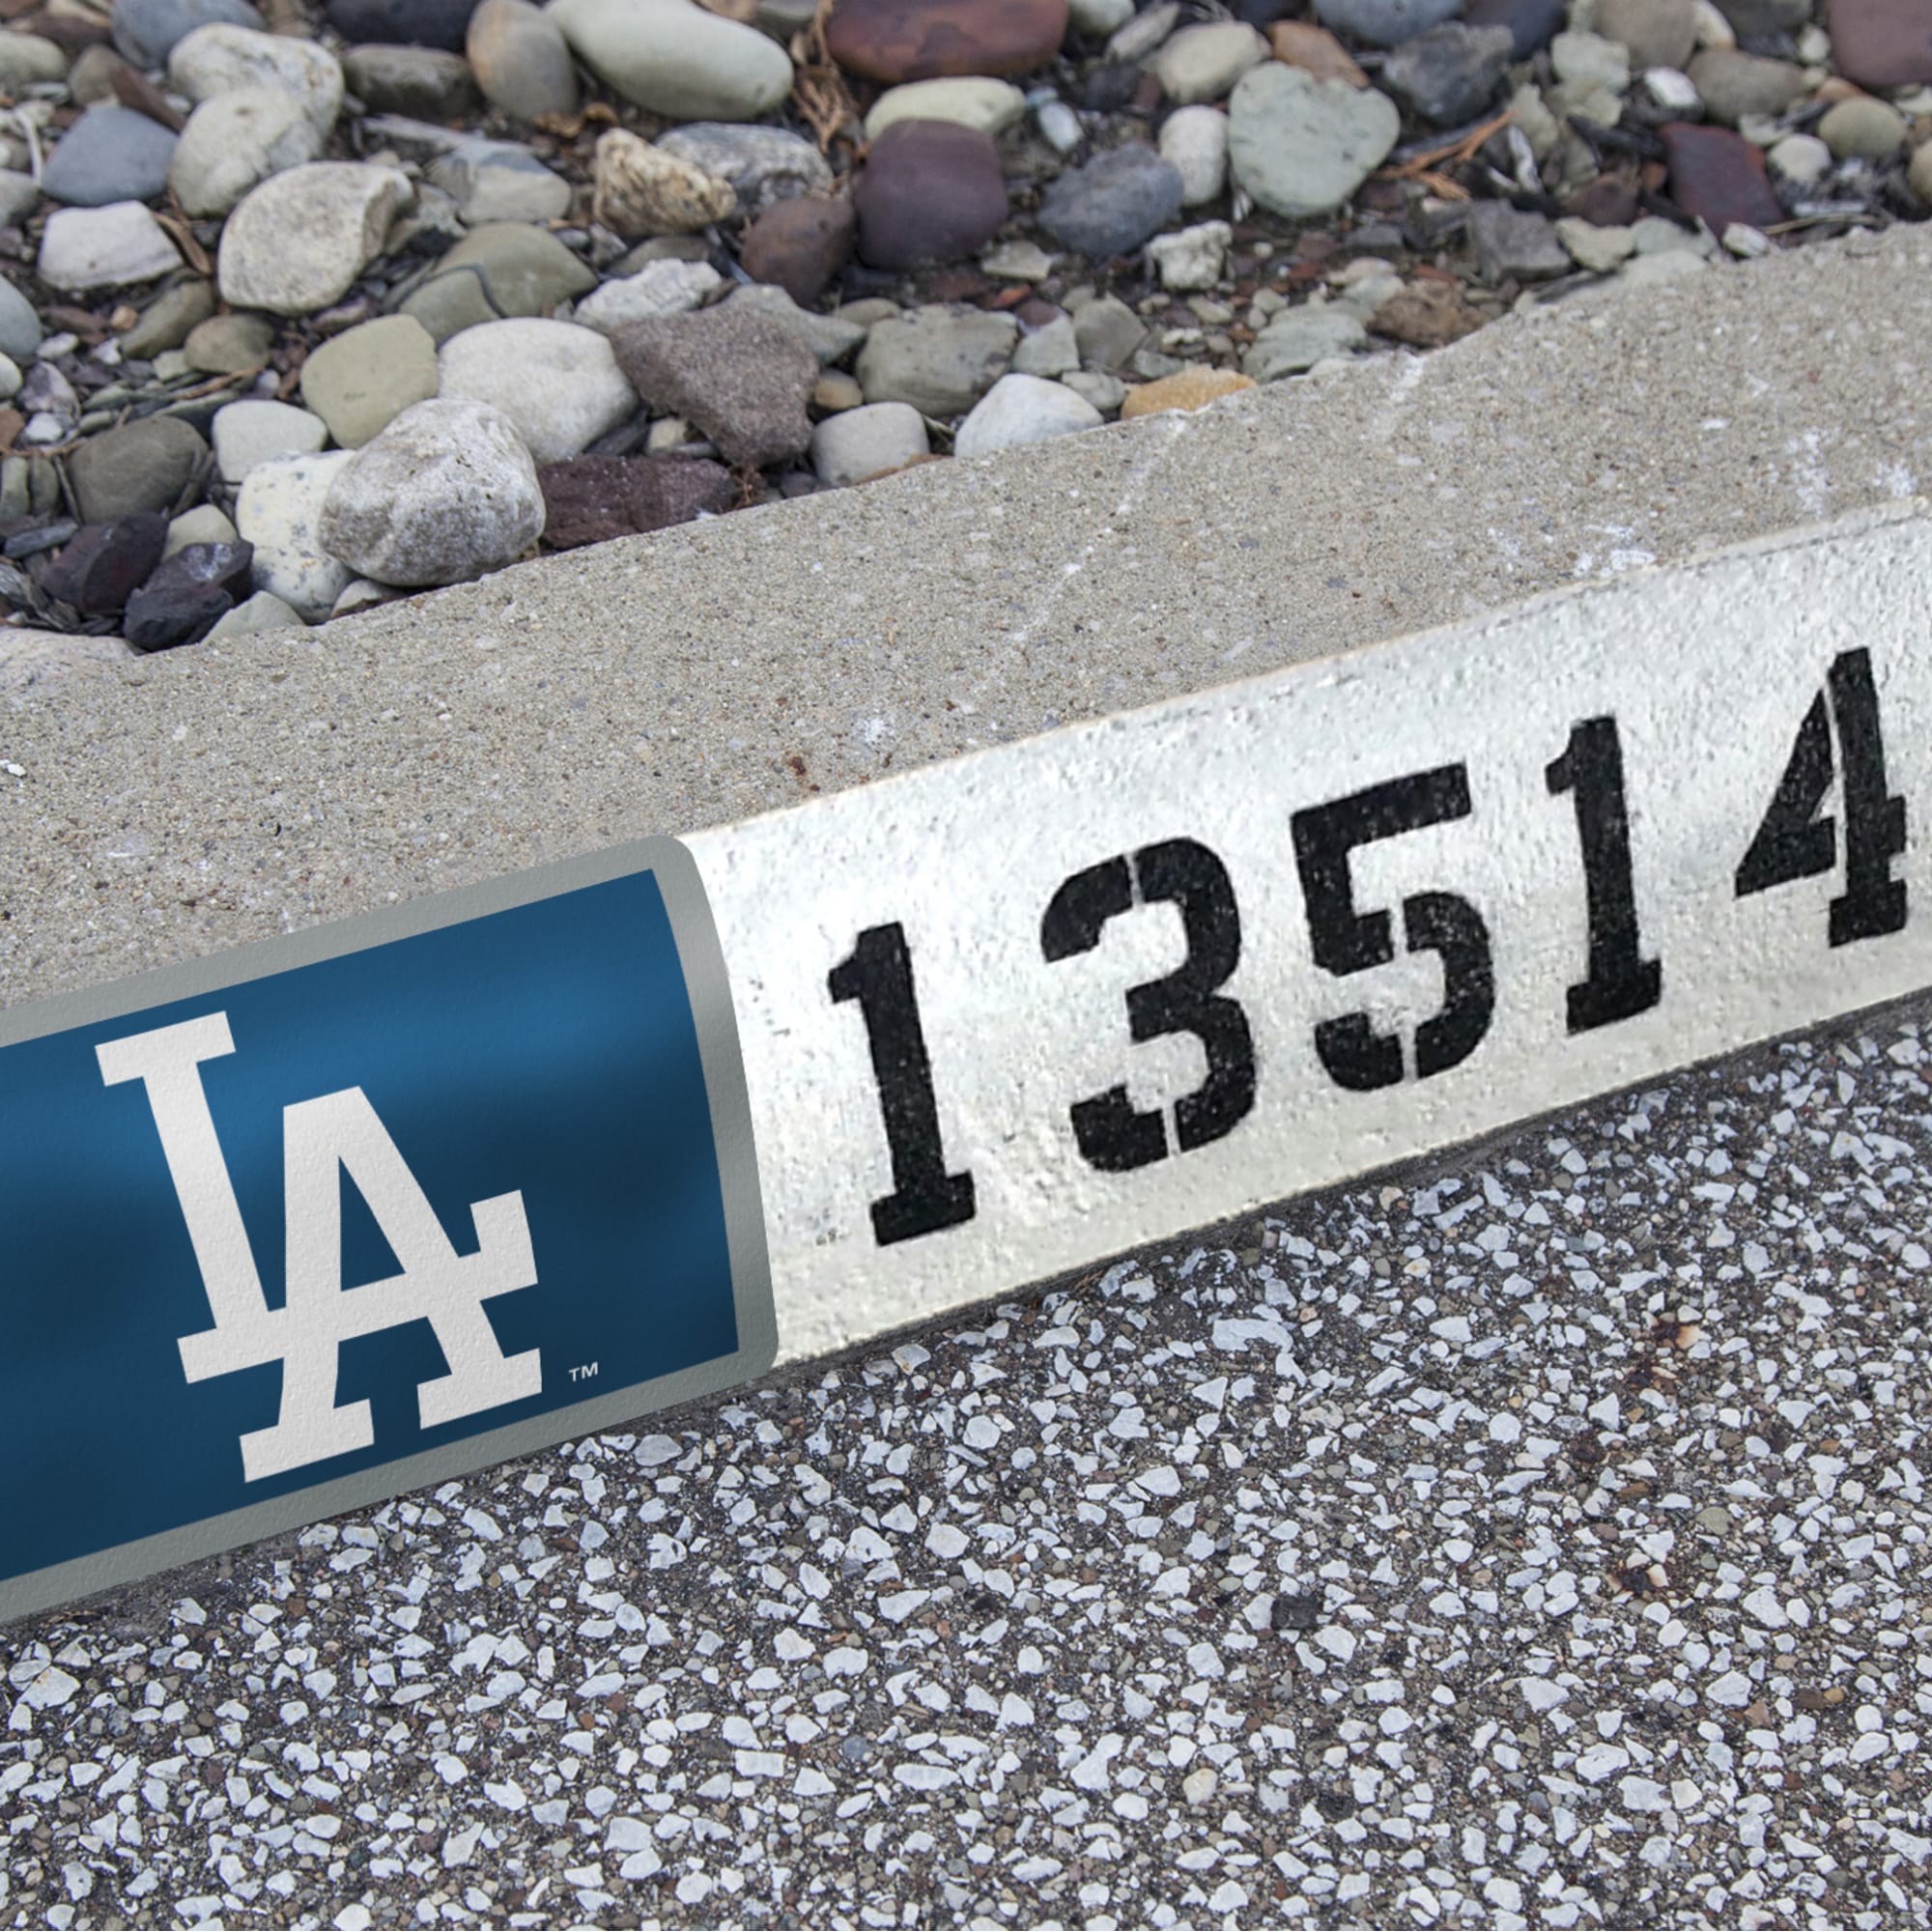 Los Angeles Dodgers: Address Block - Officially Licensed MLB Outdoor Graphic 6.0"W x 8.0"H by Fathead | Wood/Aluminum